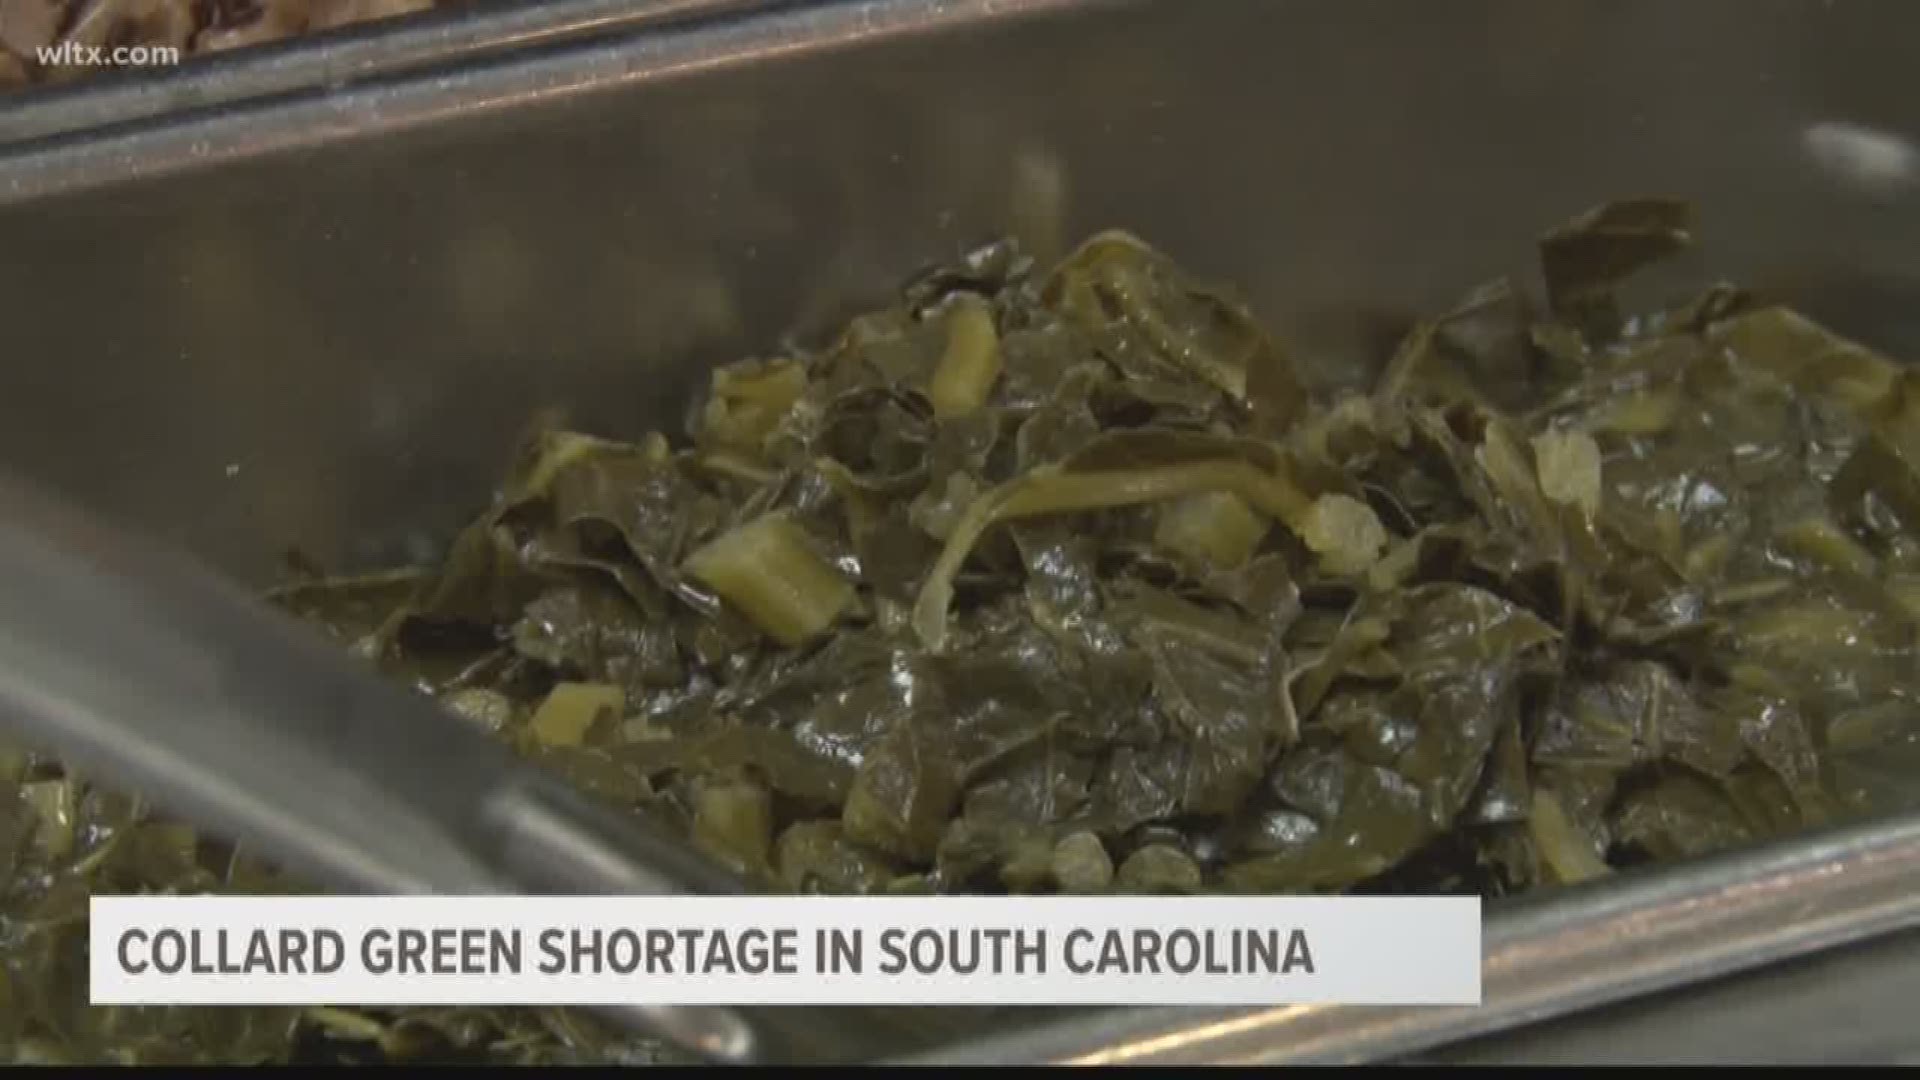 Expect to spend a little more for the greens that are a symbol of monetary good fortune. Locally, Clayton Rawl Farms in Lexington lost over 100 acres of collard greens due to storms, heavy rains.